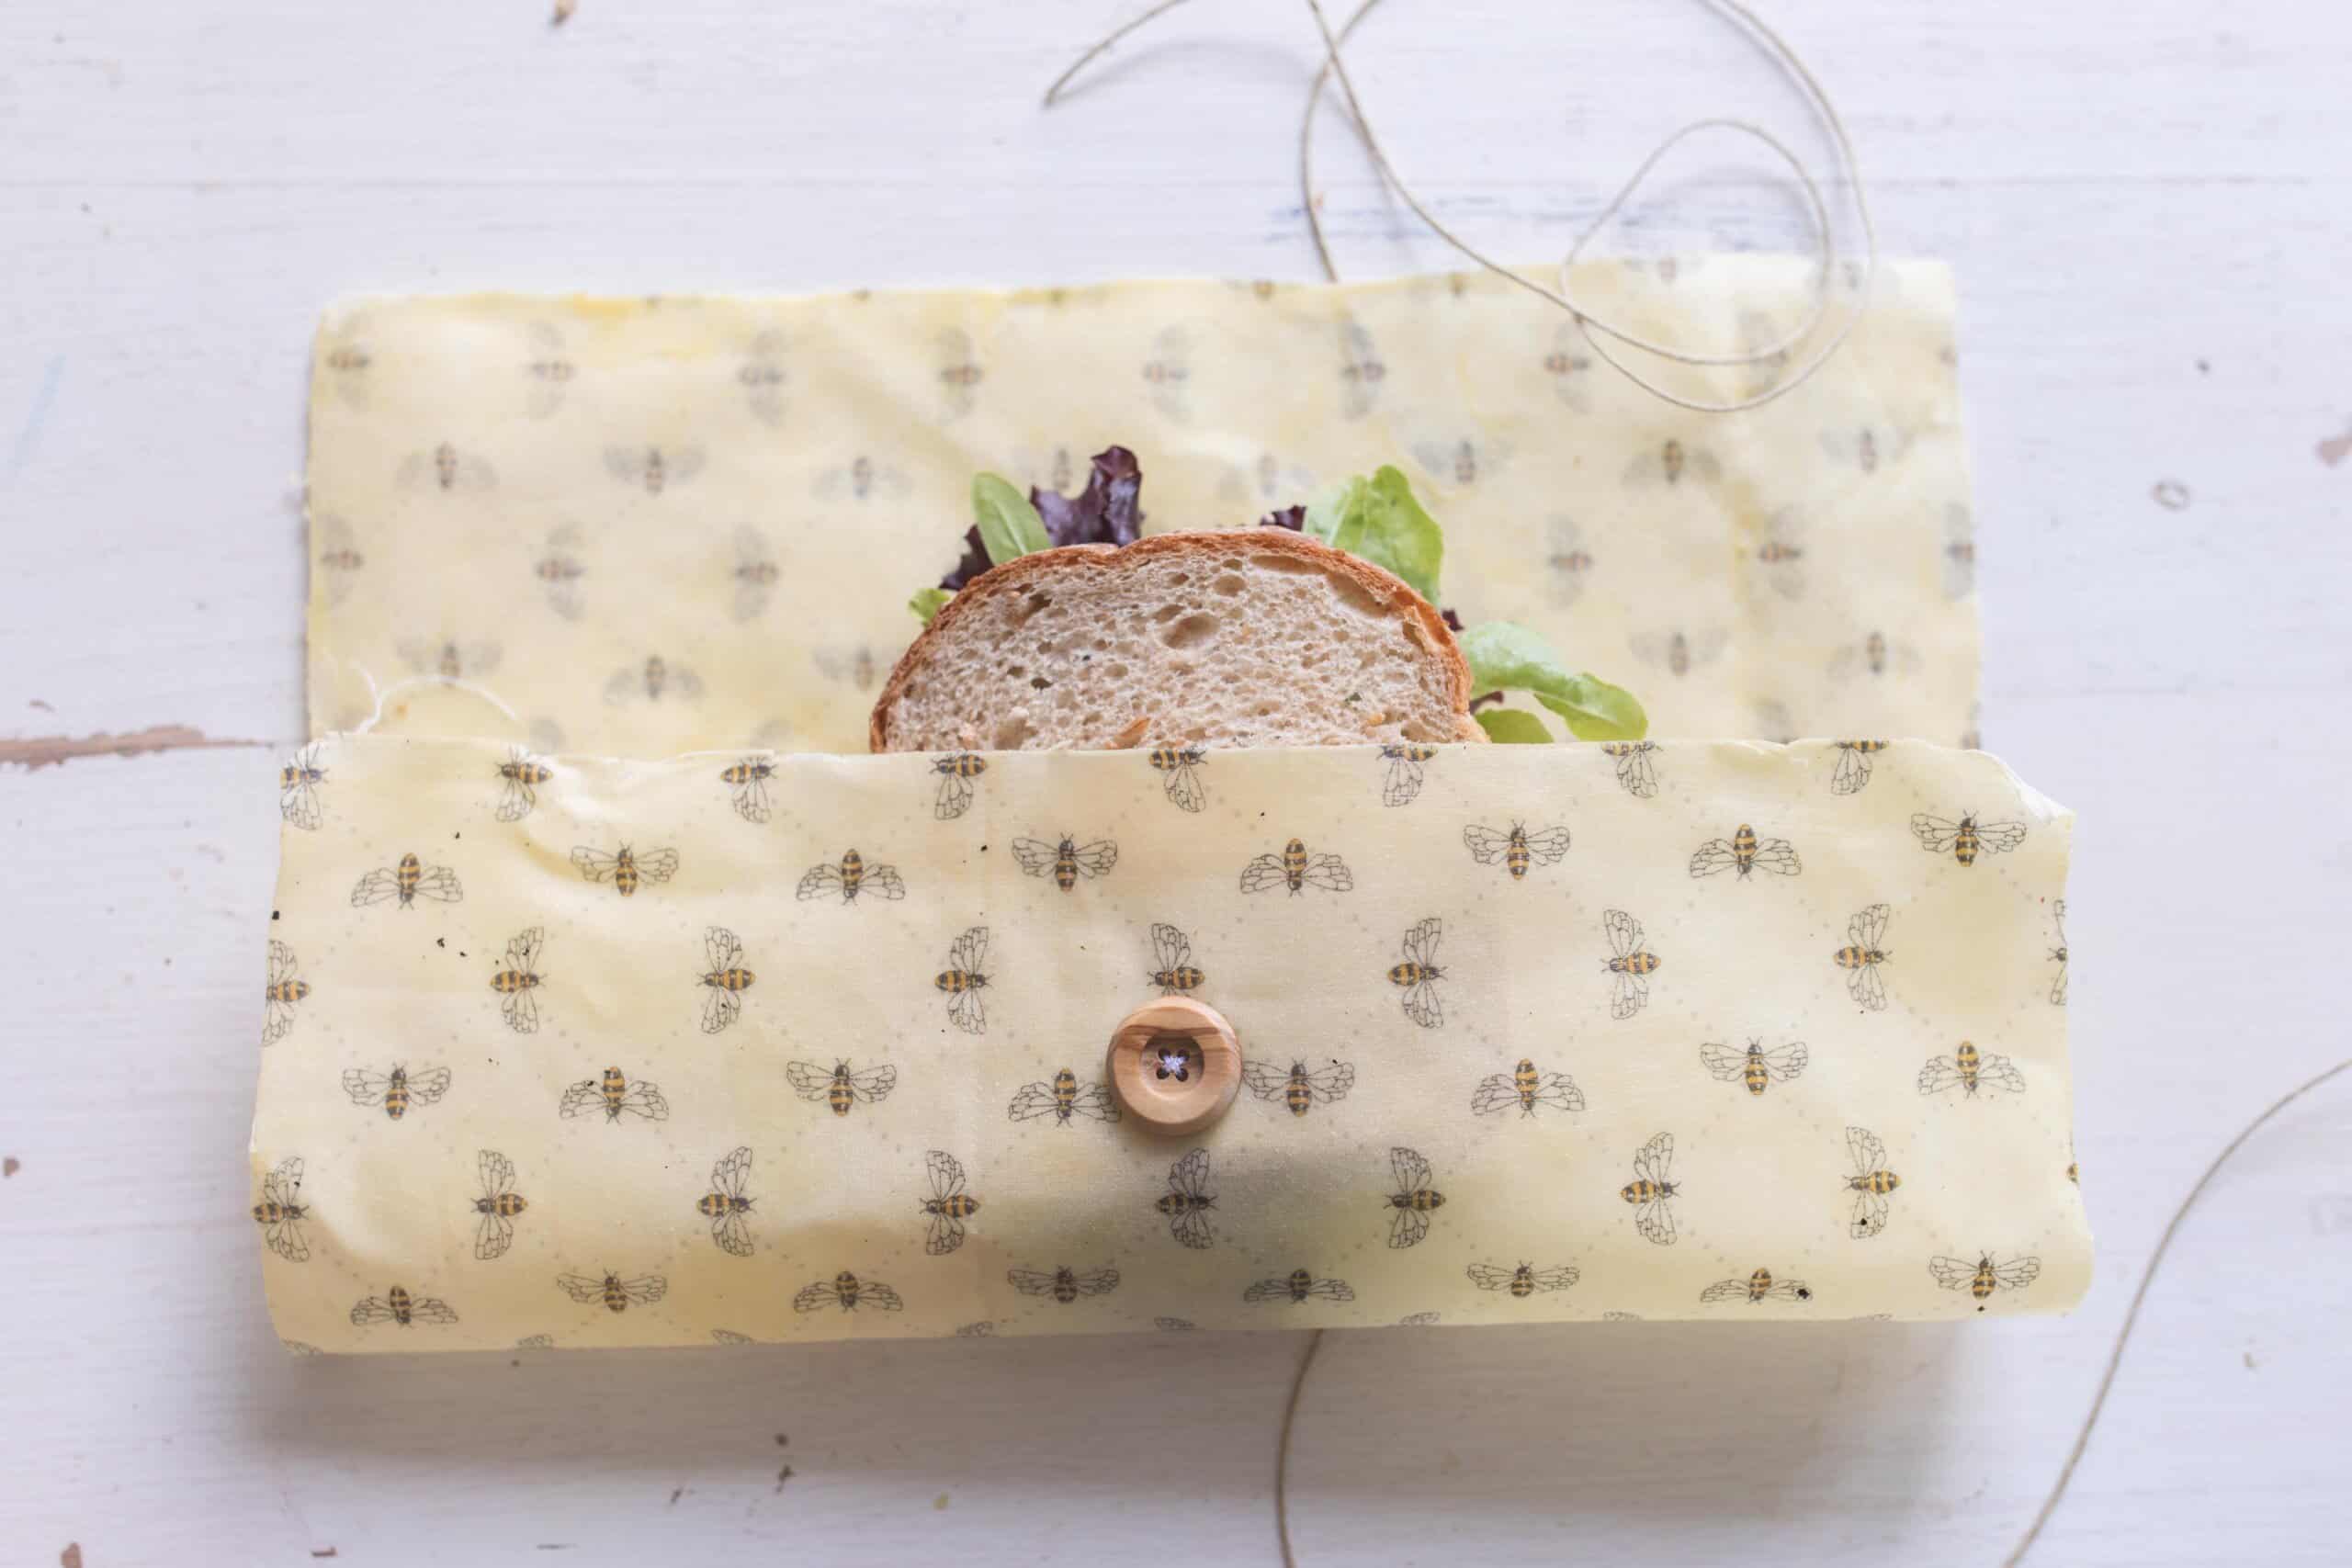 Beeswax wraps: everything you need to know